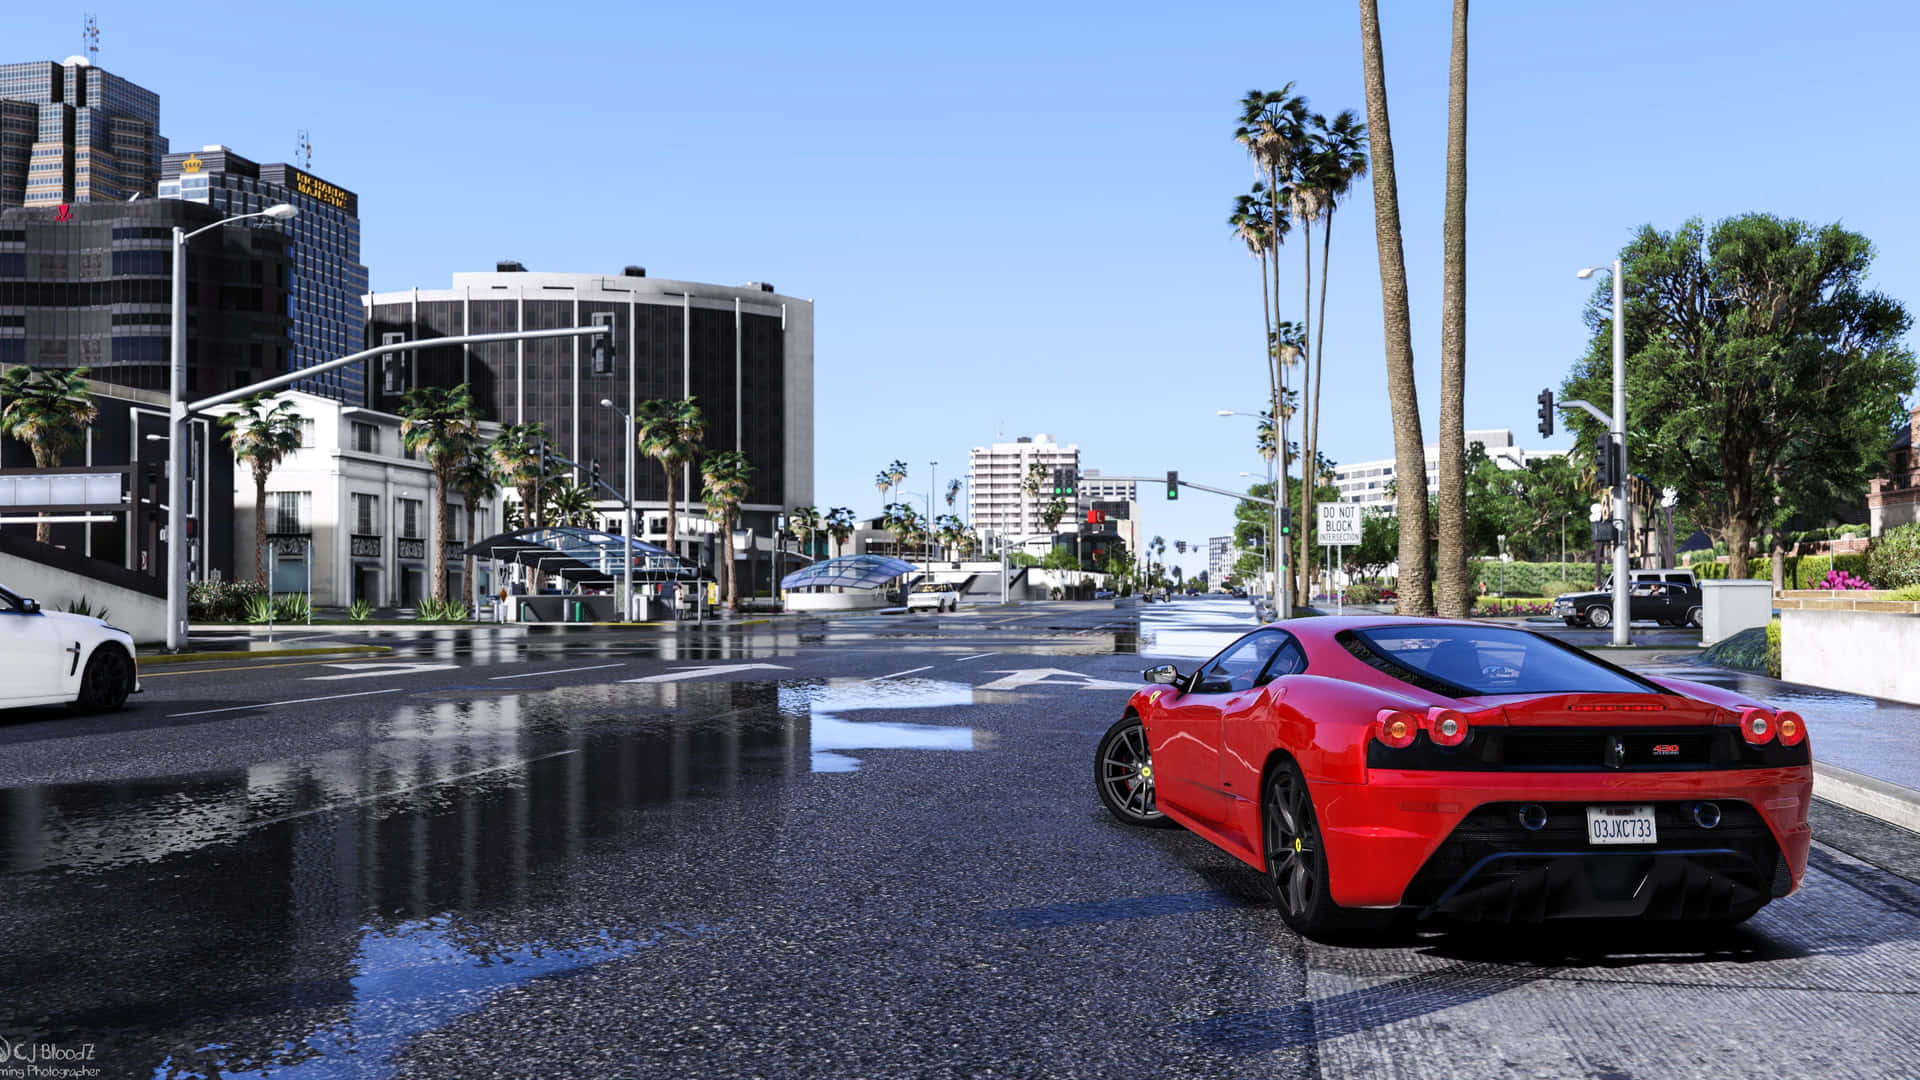 A Red Sports Car Is Parked On A Street In Grand Theft Auto Wallpaper